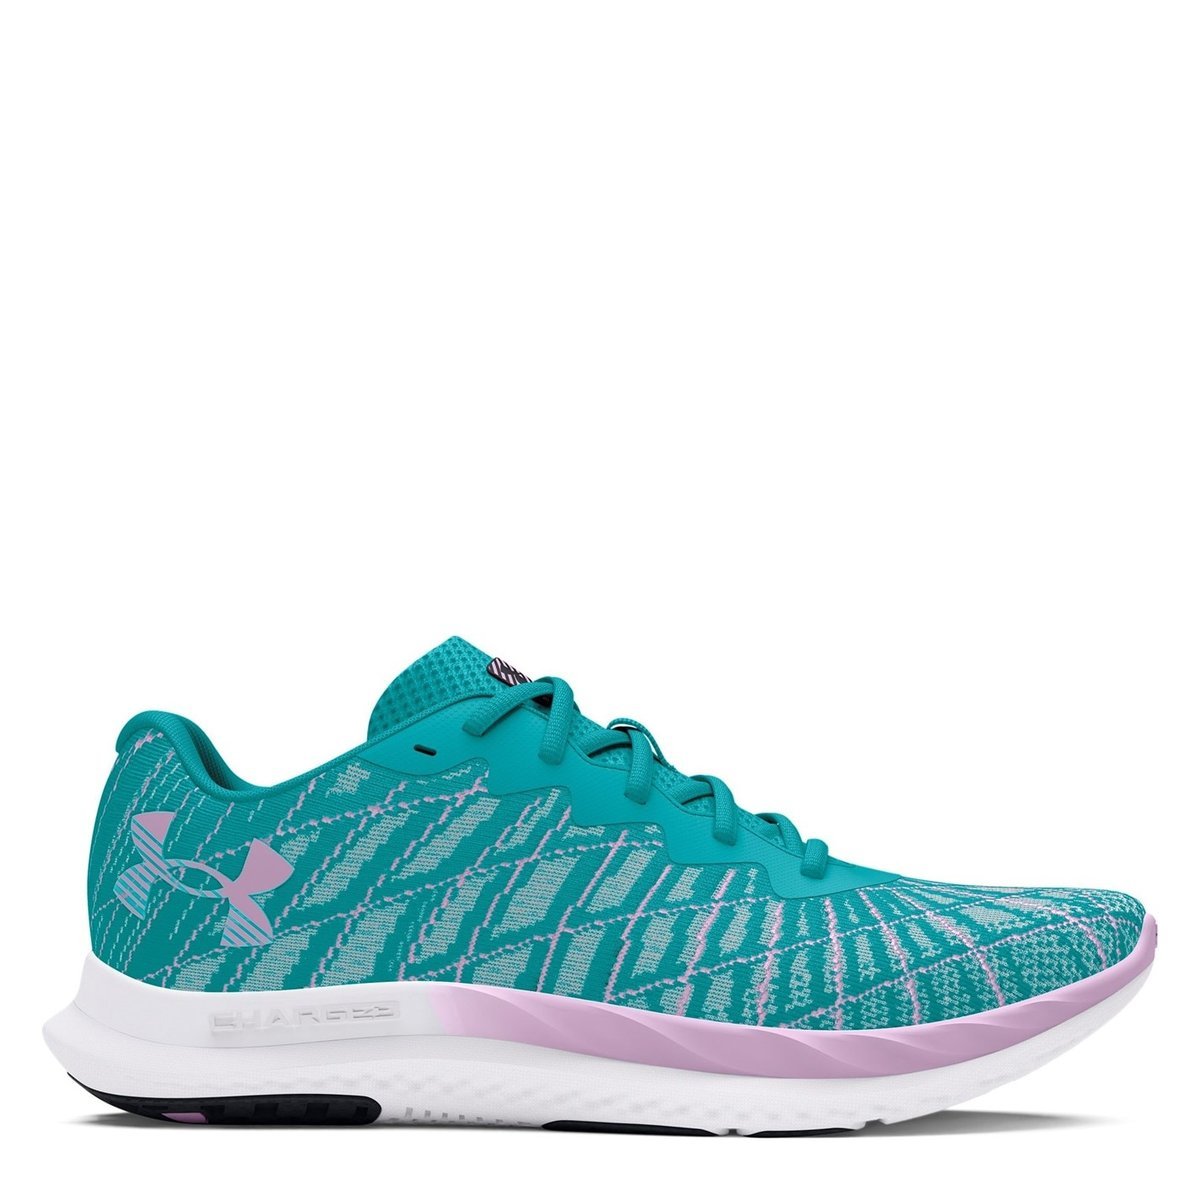 Under Armour Charged Pursuit 3 Women's Running Shoes, Sonar Blue/Purple, 4